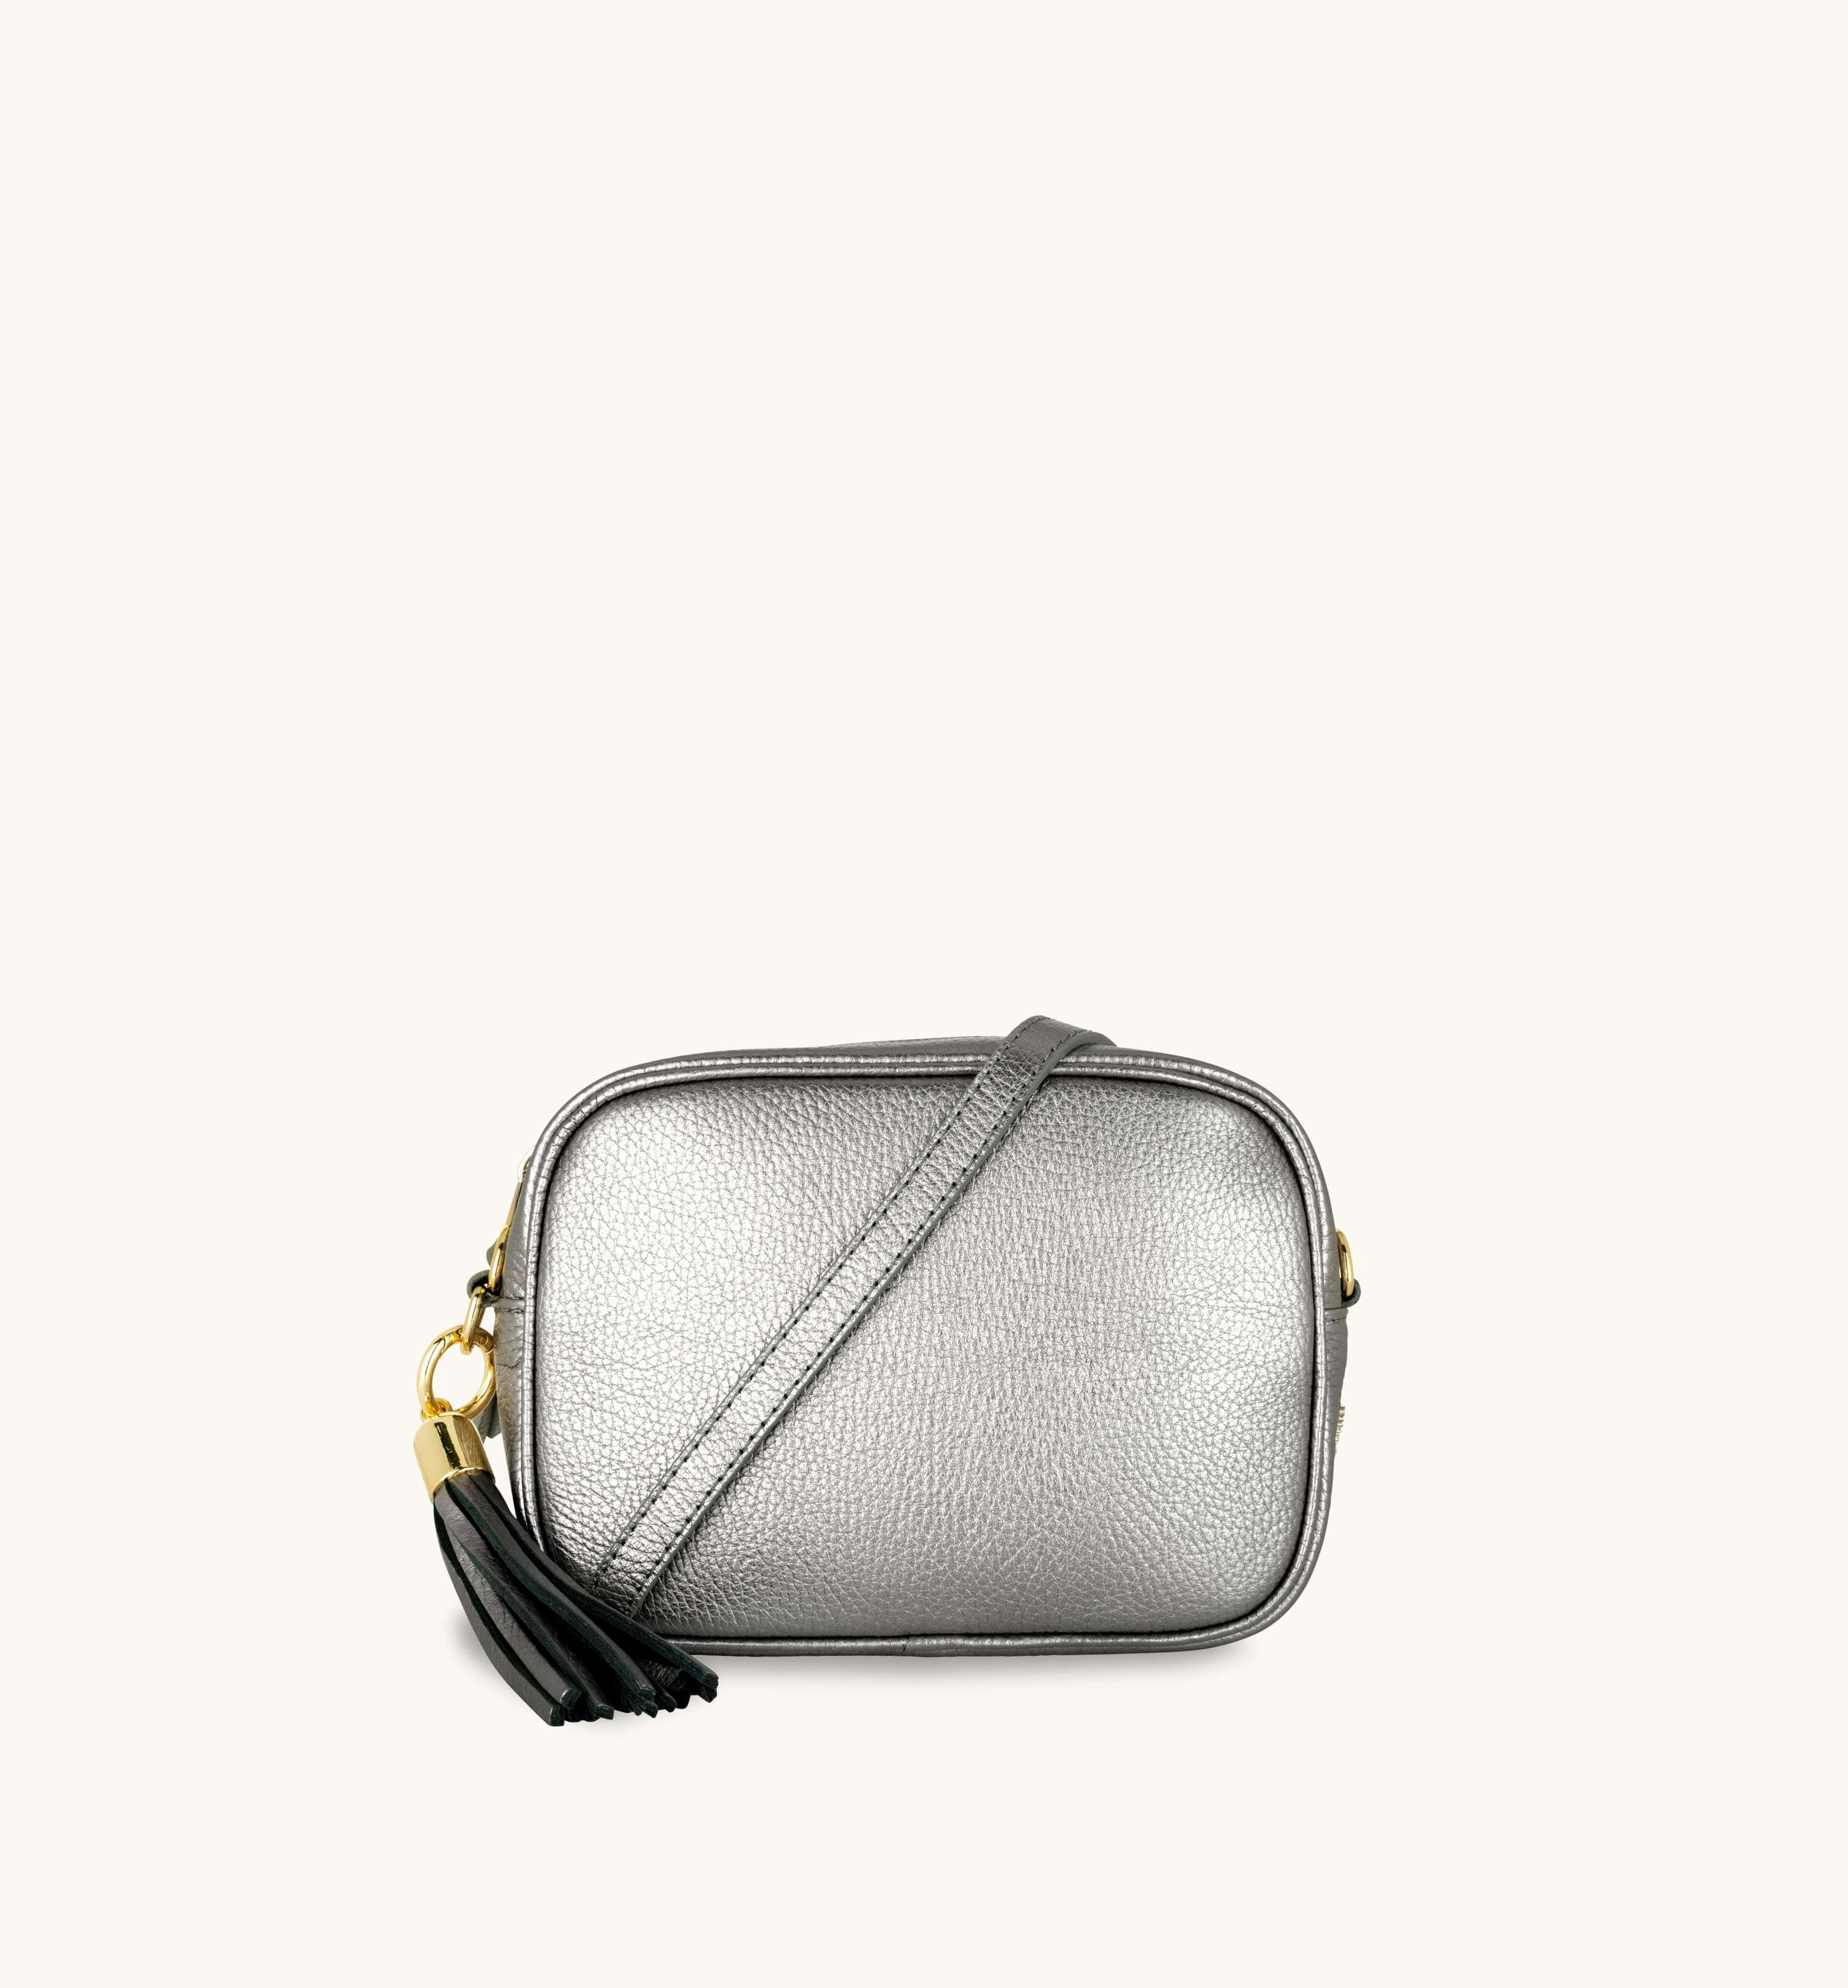 The Tassel Pewter Leather Crossbody Bag With Grey Leopard Strap